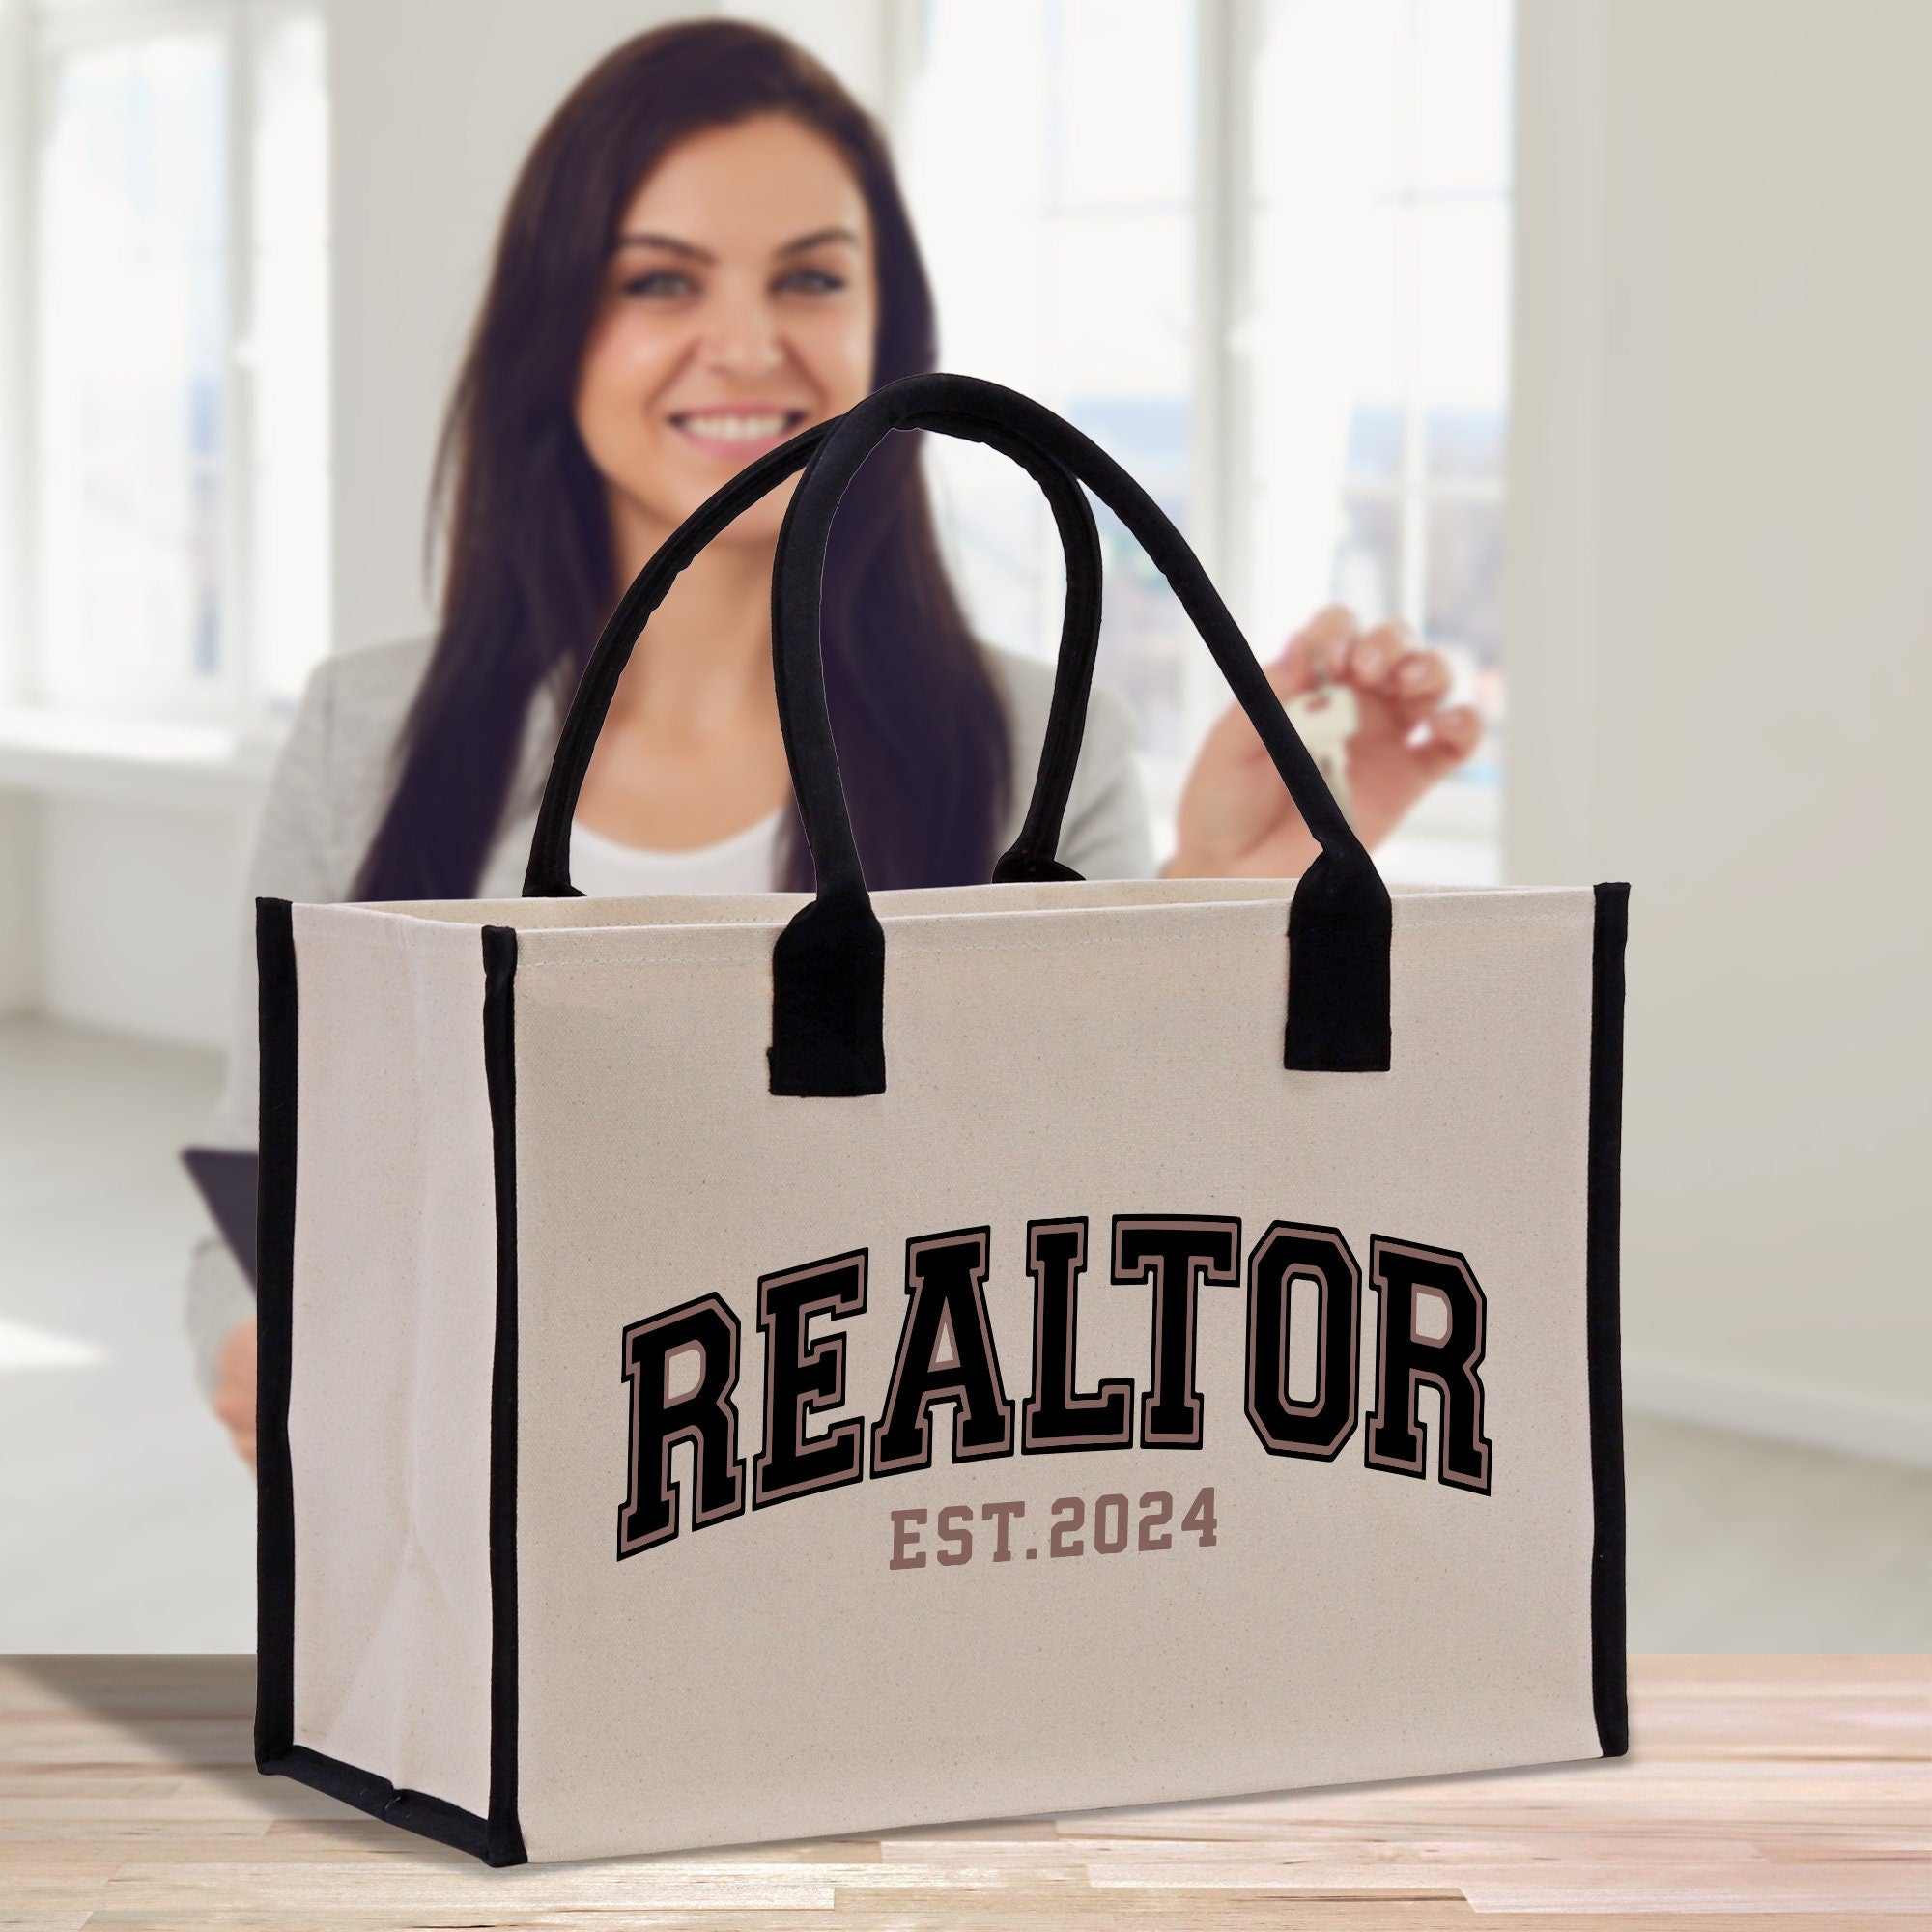 a woman is holding a realtor shopping bag